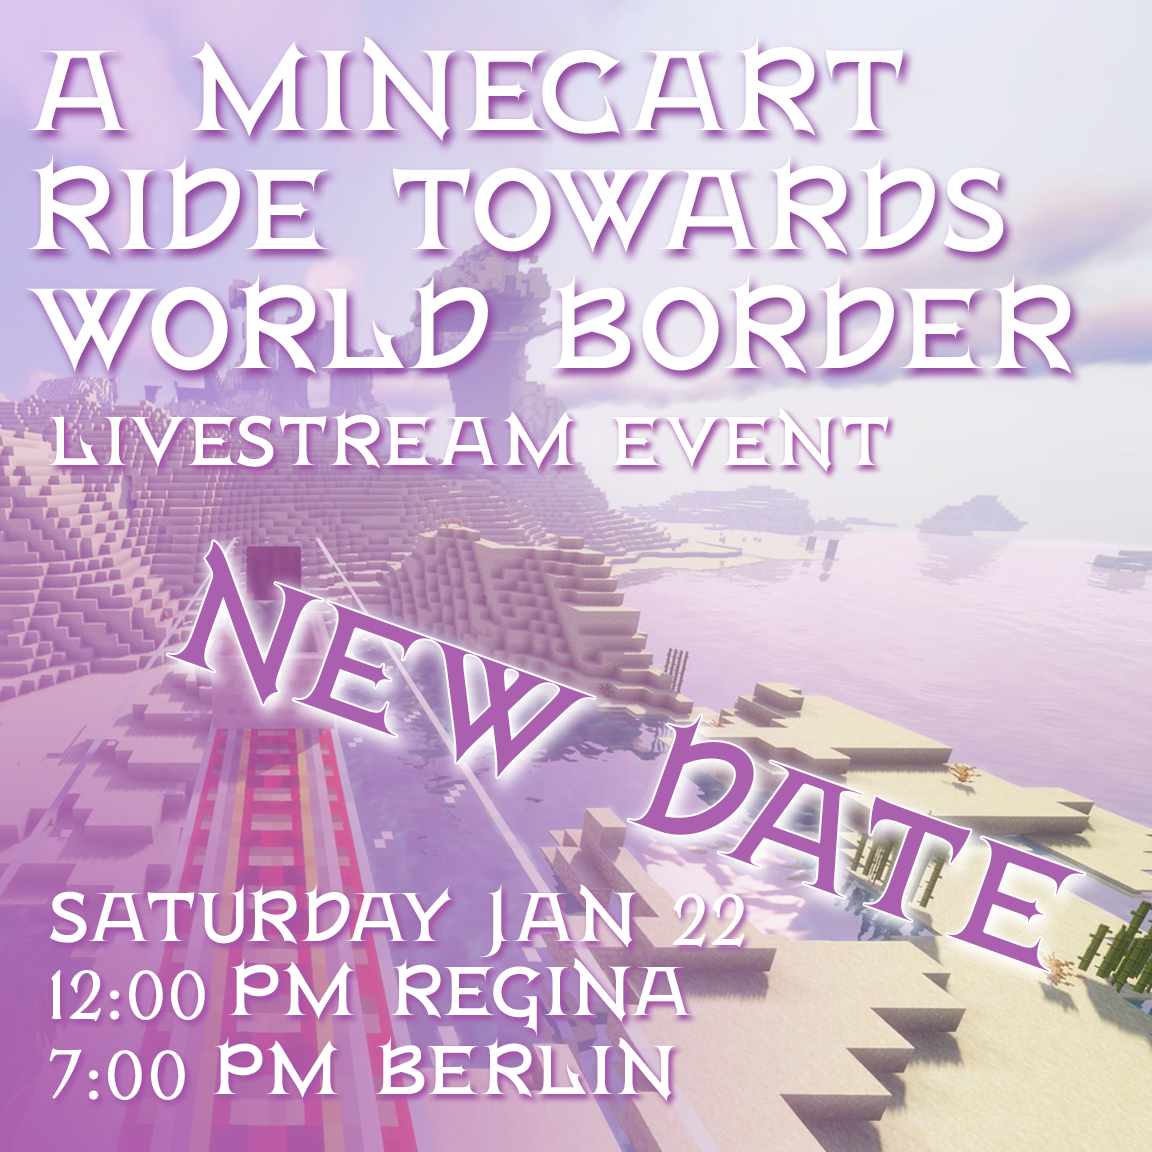 Flyer for the Minecraft journey towards World Border event, showing the event title and a pink-toned image of a minecart track